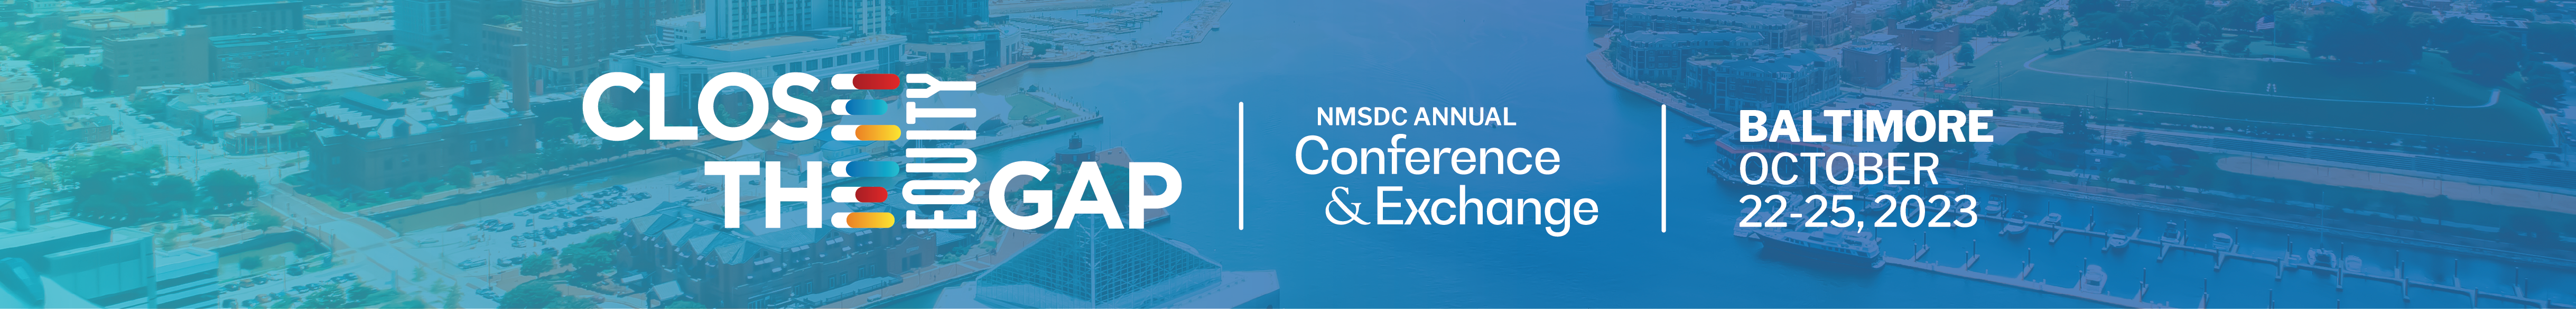 NMSDC Annual Conference & Exchange 2023